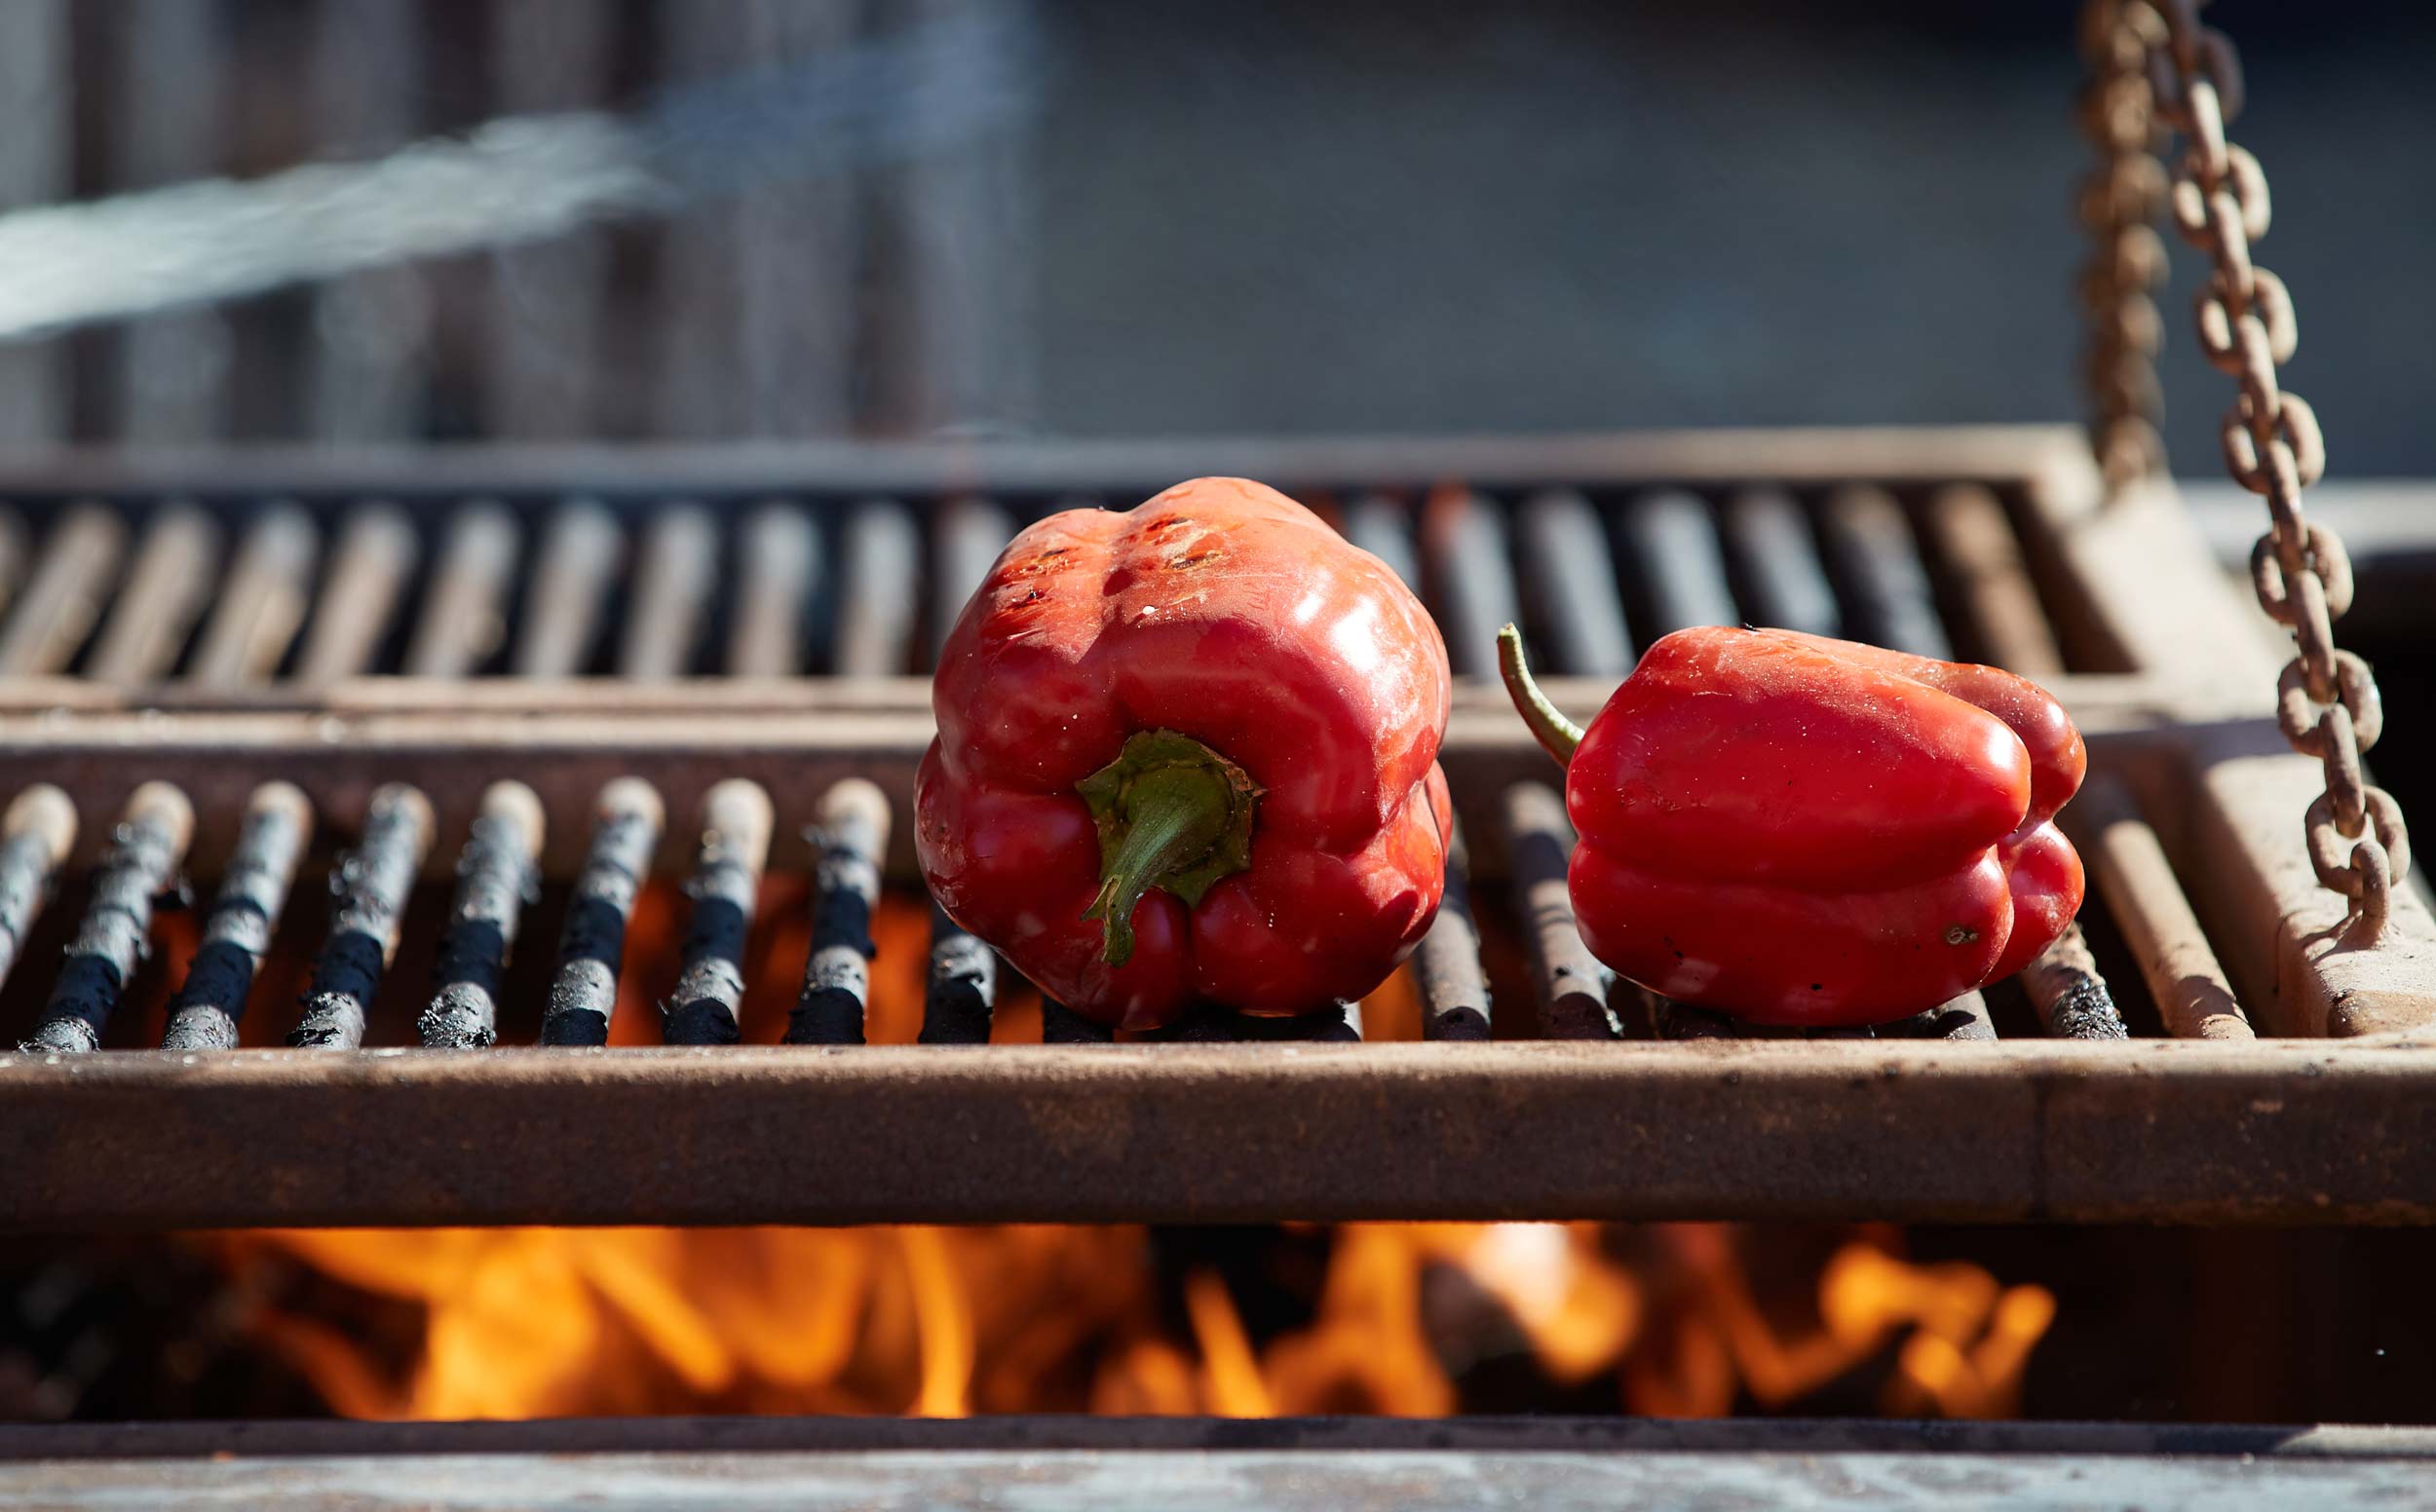 Red Peppers Grill Over an Open Flame